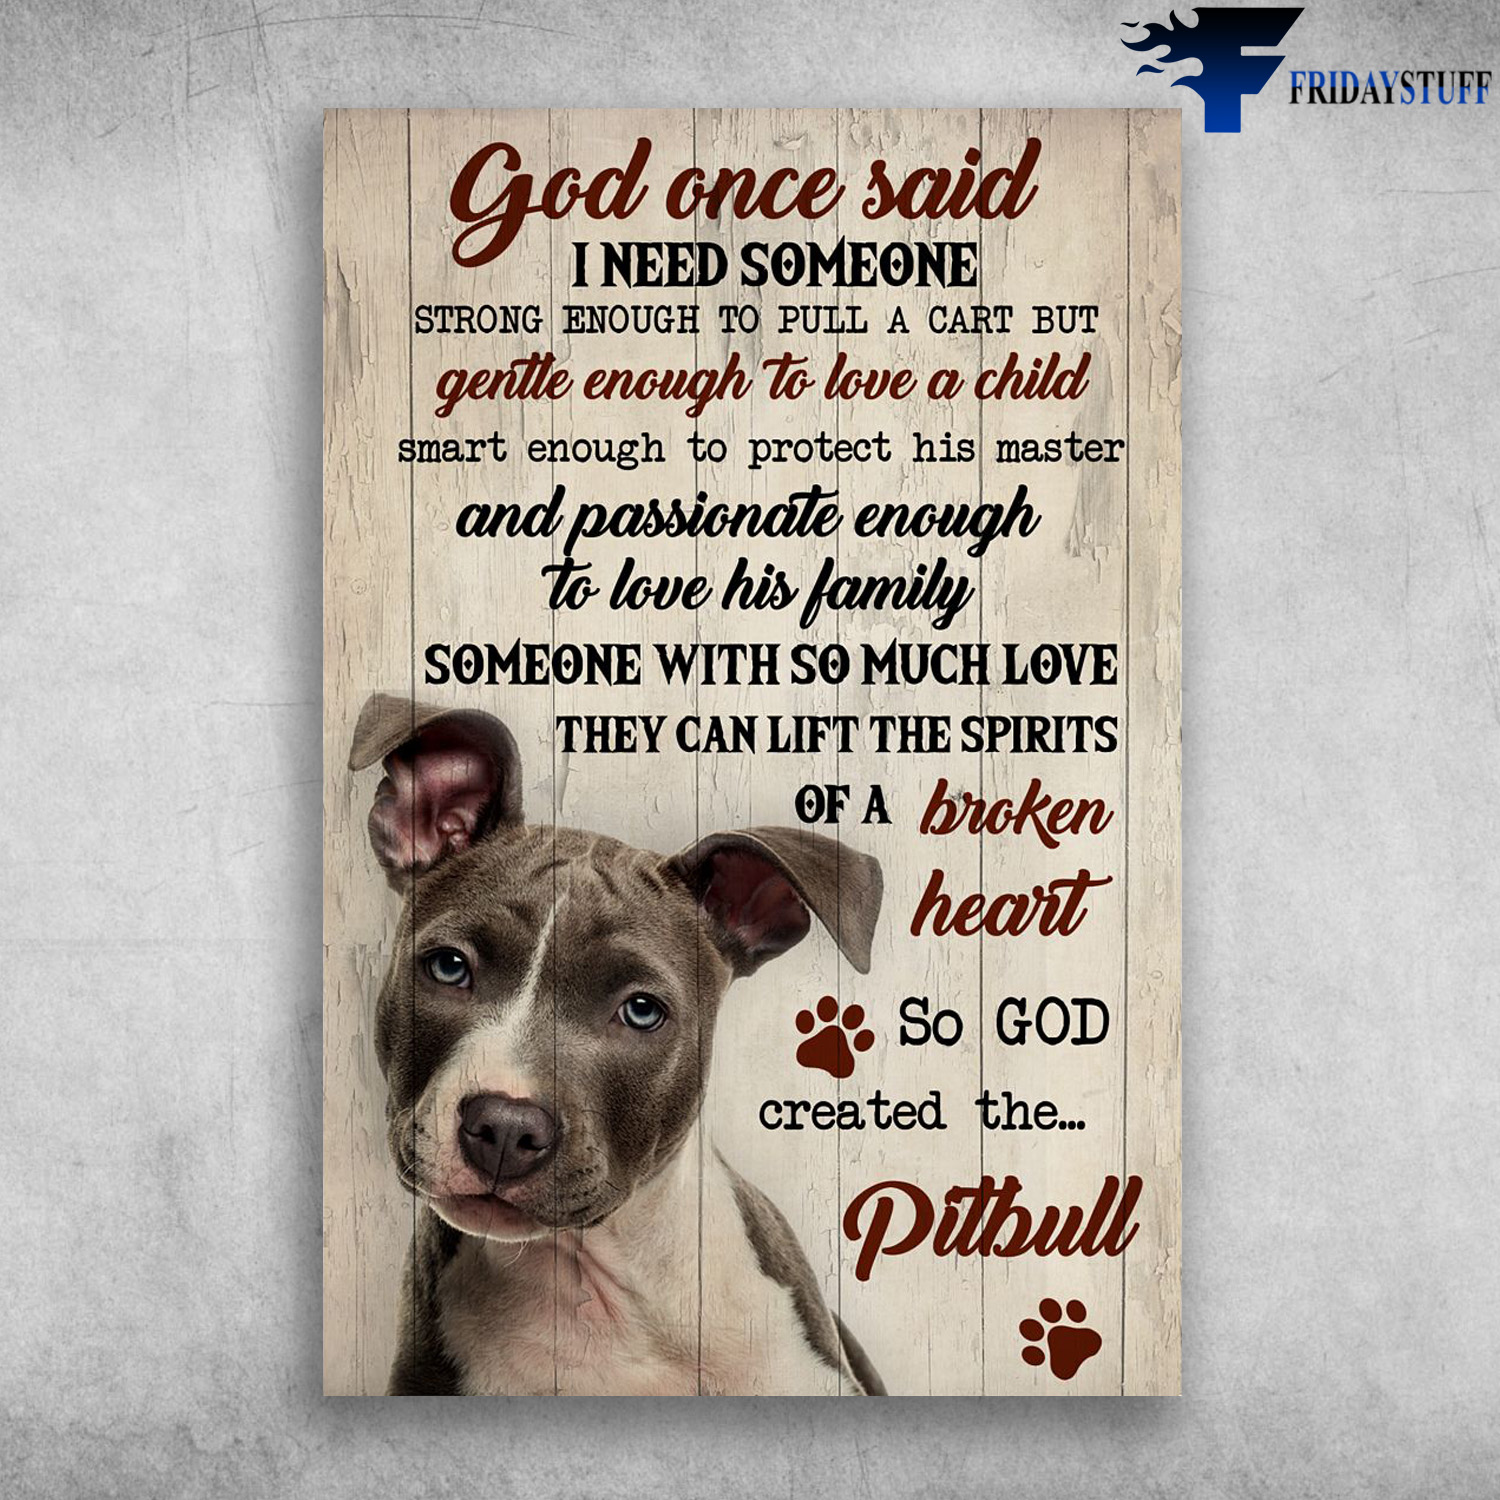 Pitbull Dog - God Once Said, I Need Someone Sreong Enough To Pull A Cart But Gentte Eugh To Love A Child, Smart Enough To Protect His Master, And Passionate Enough To Love His Family